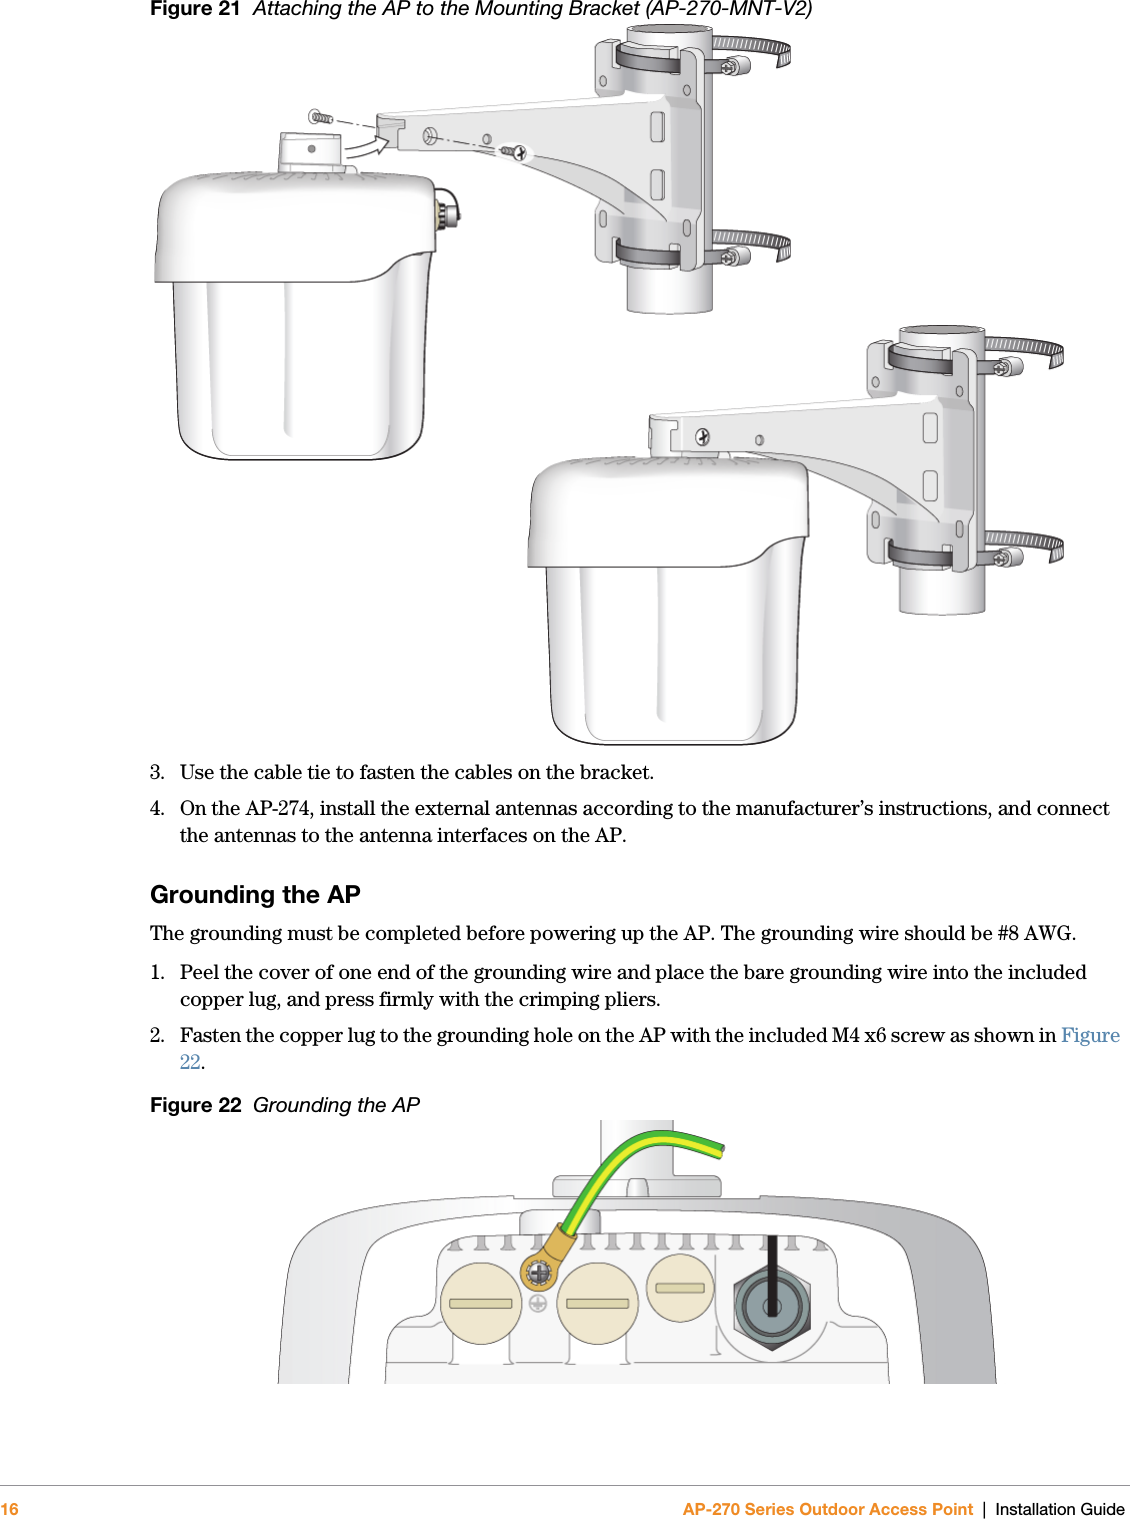 16 AP-270 Series Outdoor Access Point | Installation GuideFigure 21  Attaching the AP to the Mounting Bracket (AP-270-MNT-V2)3. Use the cable tie to fasten the cables on the bracket.4. On the AP-274, install the external antennas according to the manufacturer’s instructions, and connect the antennas to the antenna interfaces on the AP.Grounding the APThe grounding must be completed before powering up the AP. The grounding wire should be #8 AWG.1. Peel the cover of one end of the grounding wire and place the bare grounding wire into the included copper lug, and press firmly with the crimping pliers.2. Fasten the copper lug to the grounding hole on the AP with the included M4 x6 screw as shown in Figure 22. Figure 22  Grounding the AP 